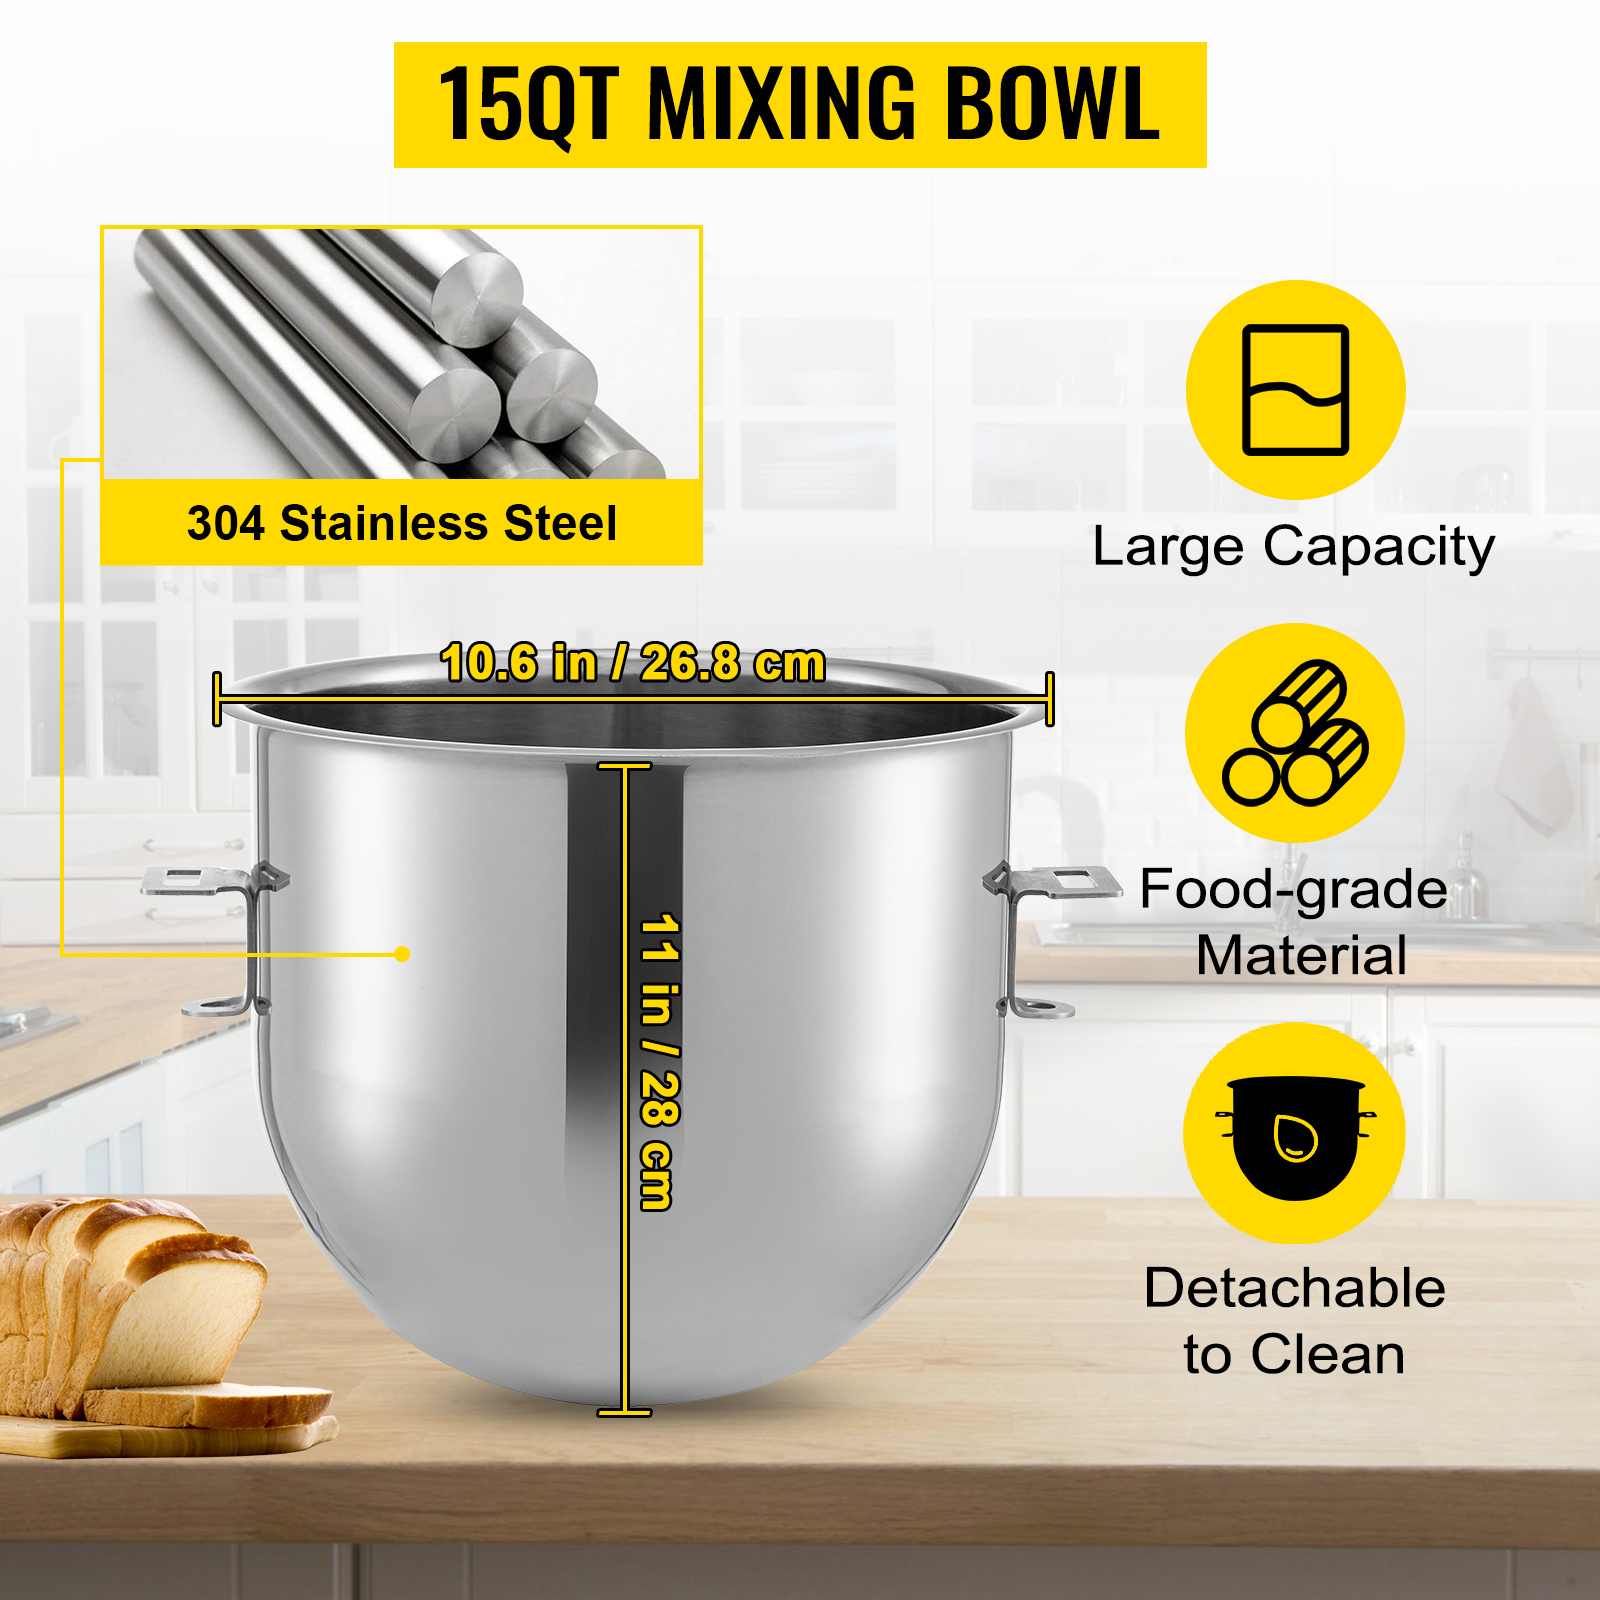 VEVOR 15 Qt. Commercial Food Mixer 3 Speeds Adjustable Spiral Mixer with  Stainless Steel Bowl for Schools Bakeries DDJBJ15LCLSB15B01V1 - The Home  Depot